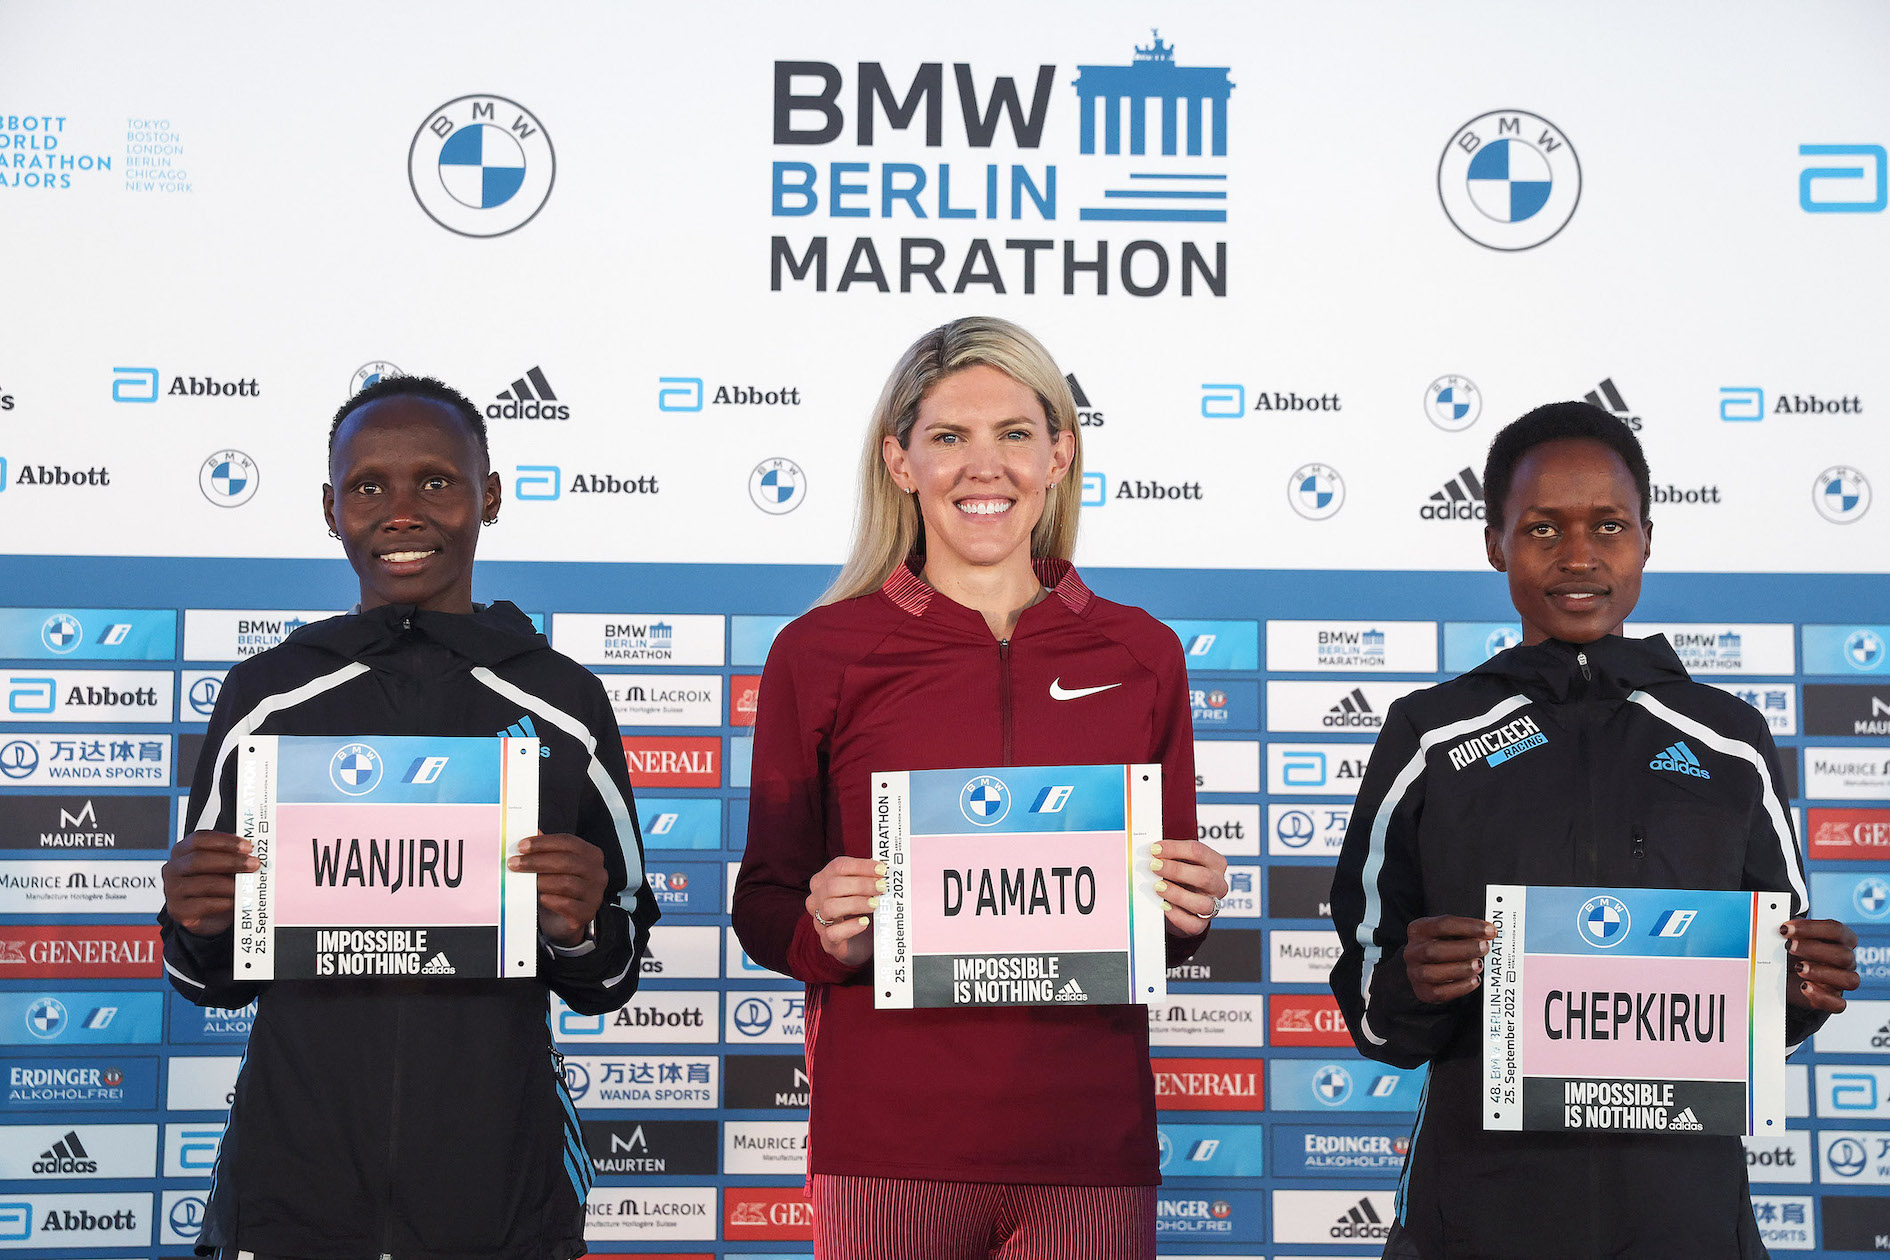 Three of the women who are in contention for the title at the 2022 BMW Berlin Marathon: Rosemary Wanjiru (KEN), Keira D'Amato (USA) and Vibian Chepkirui (KEN)